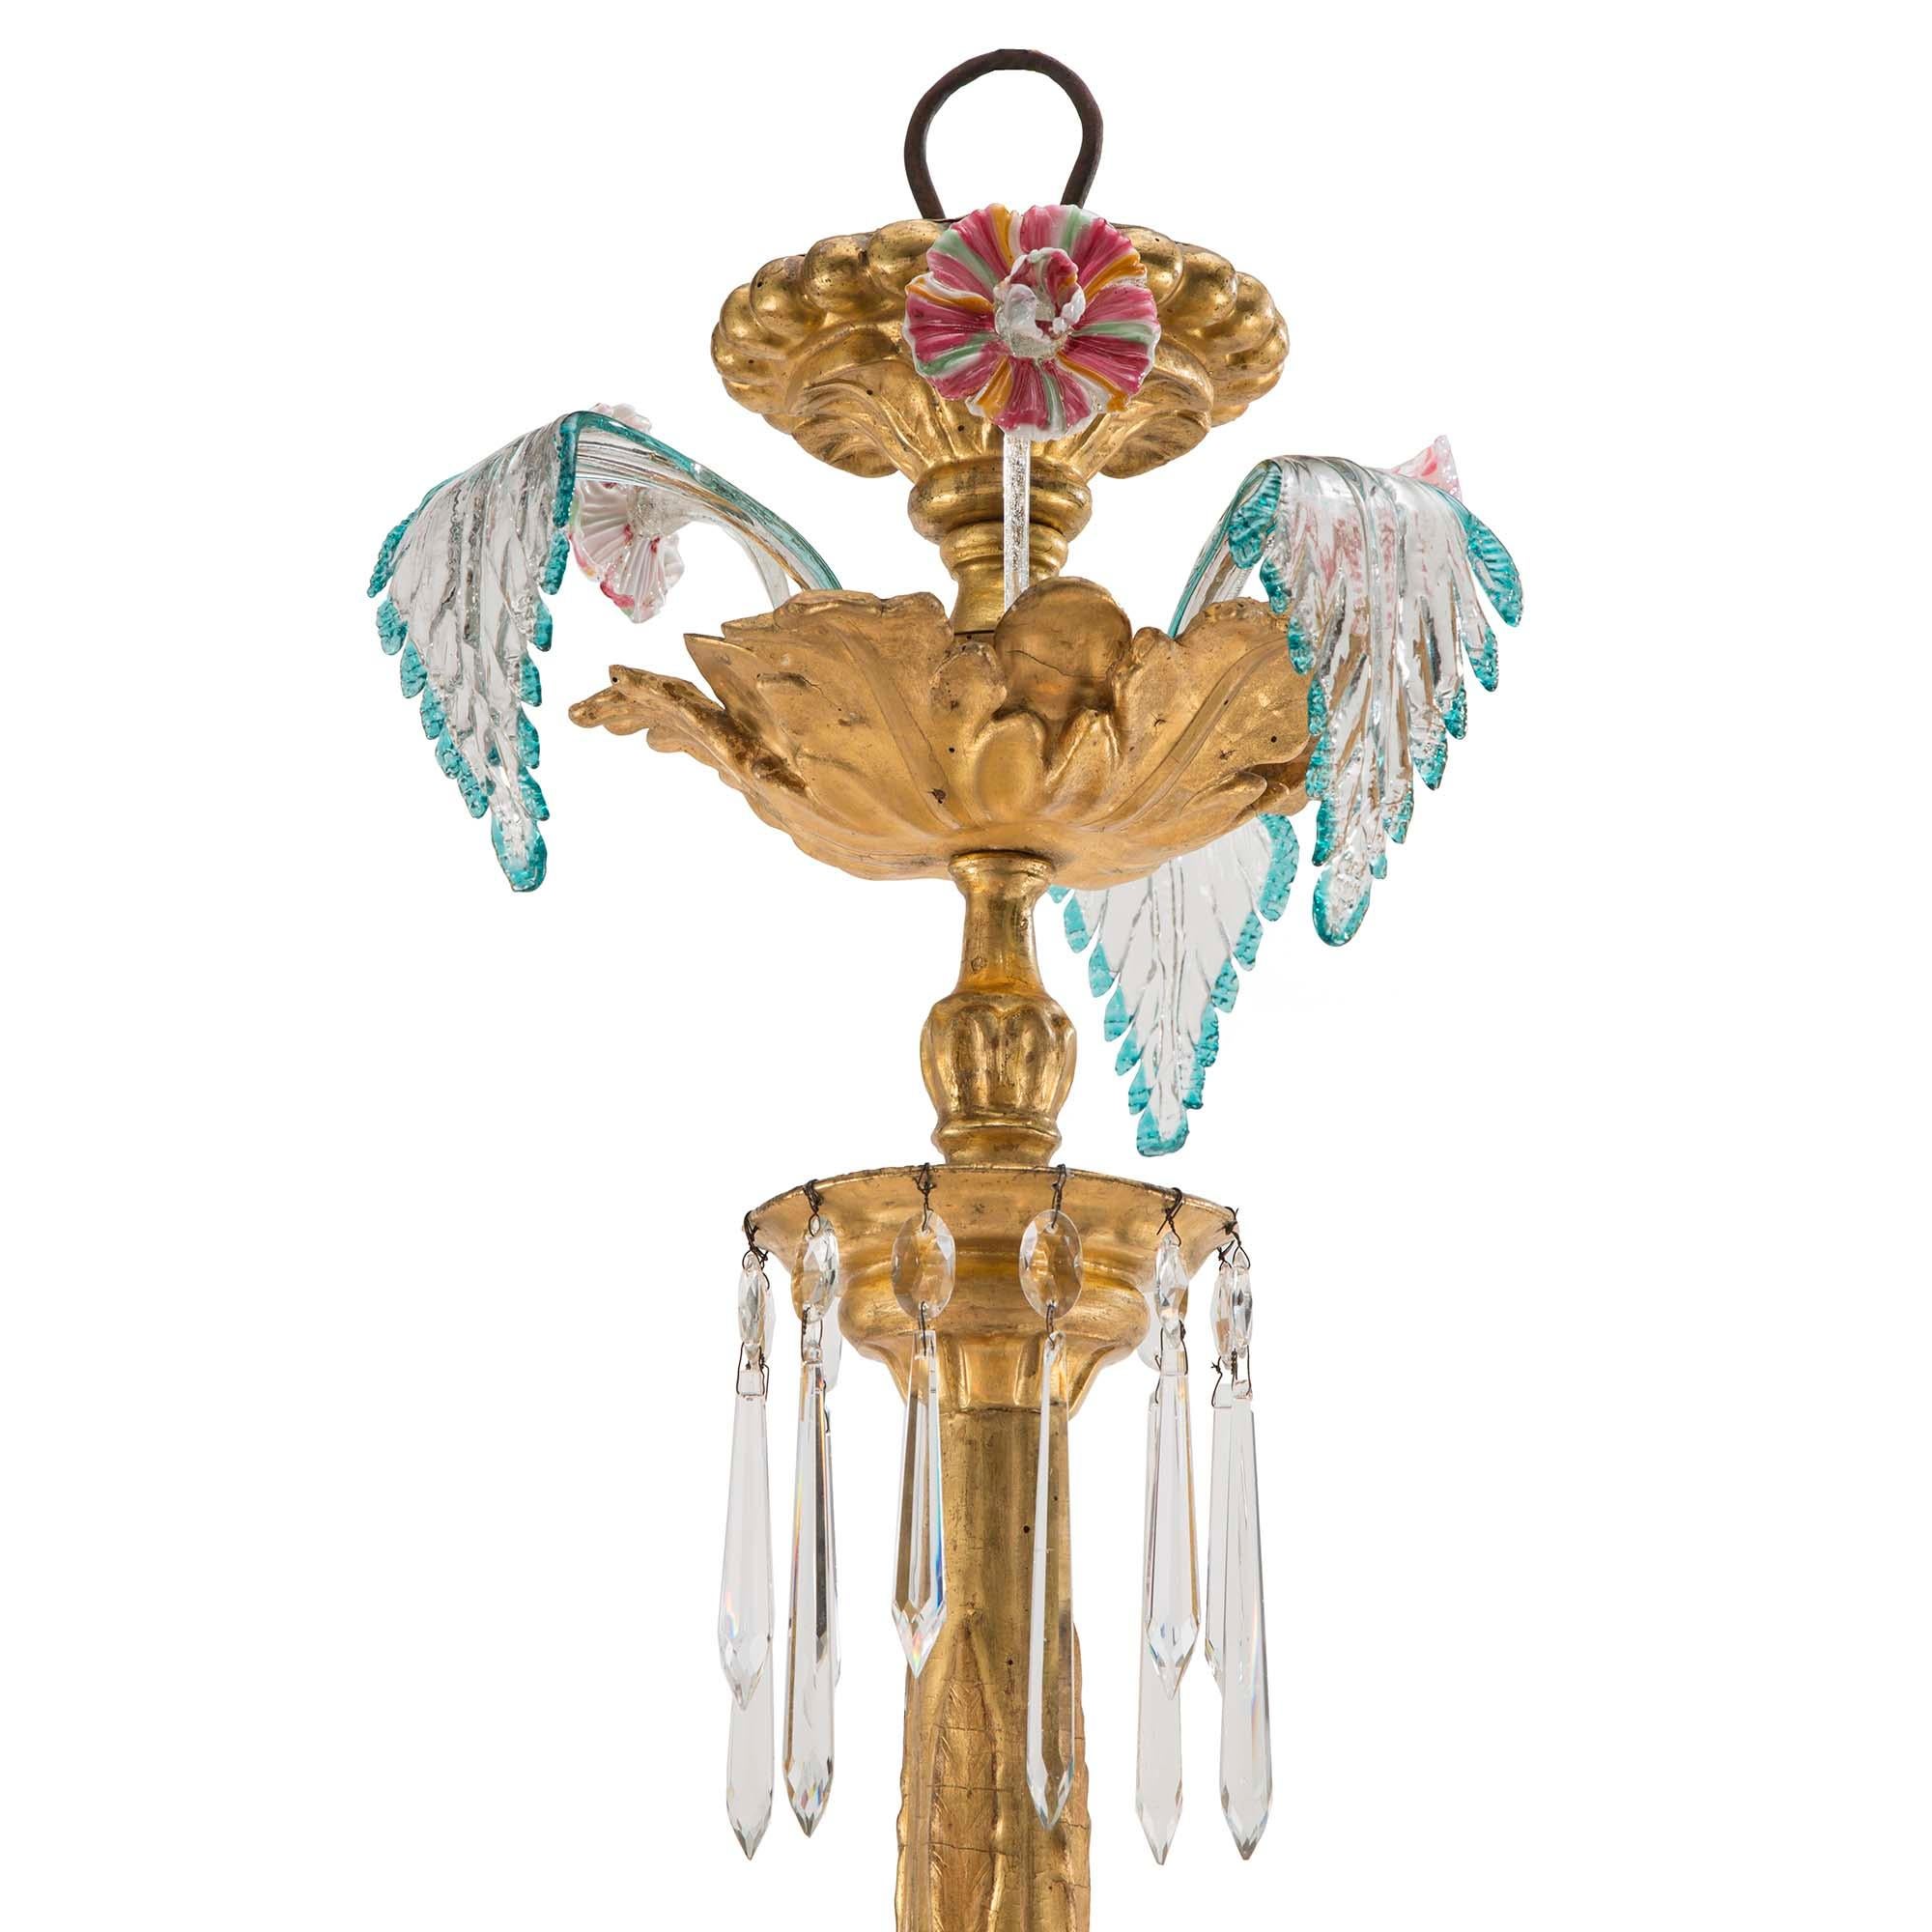 A stunning Italian 19th century Murano glass and giltwood ten light chandelier. At the bottom is a cut crystal inverted saucer, centered by a glass sphere pendant amidst kite shaped glass. The carved giltwood base has ten spiral cut glass arms with